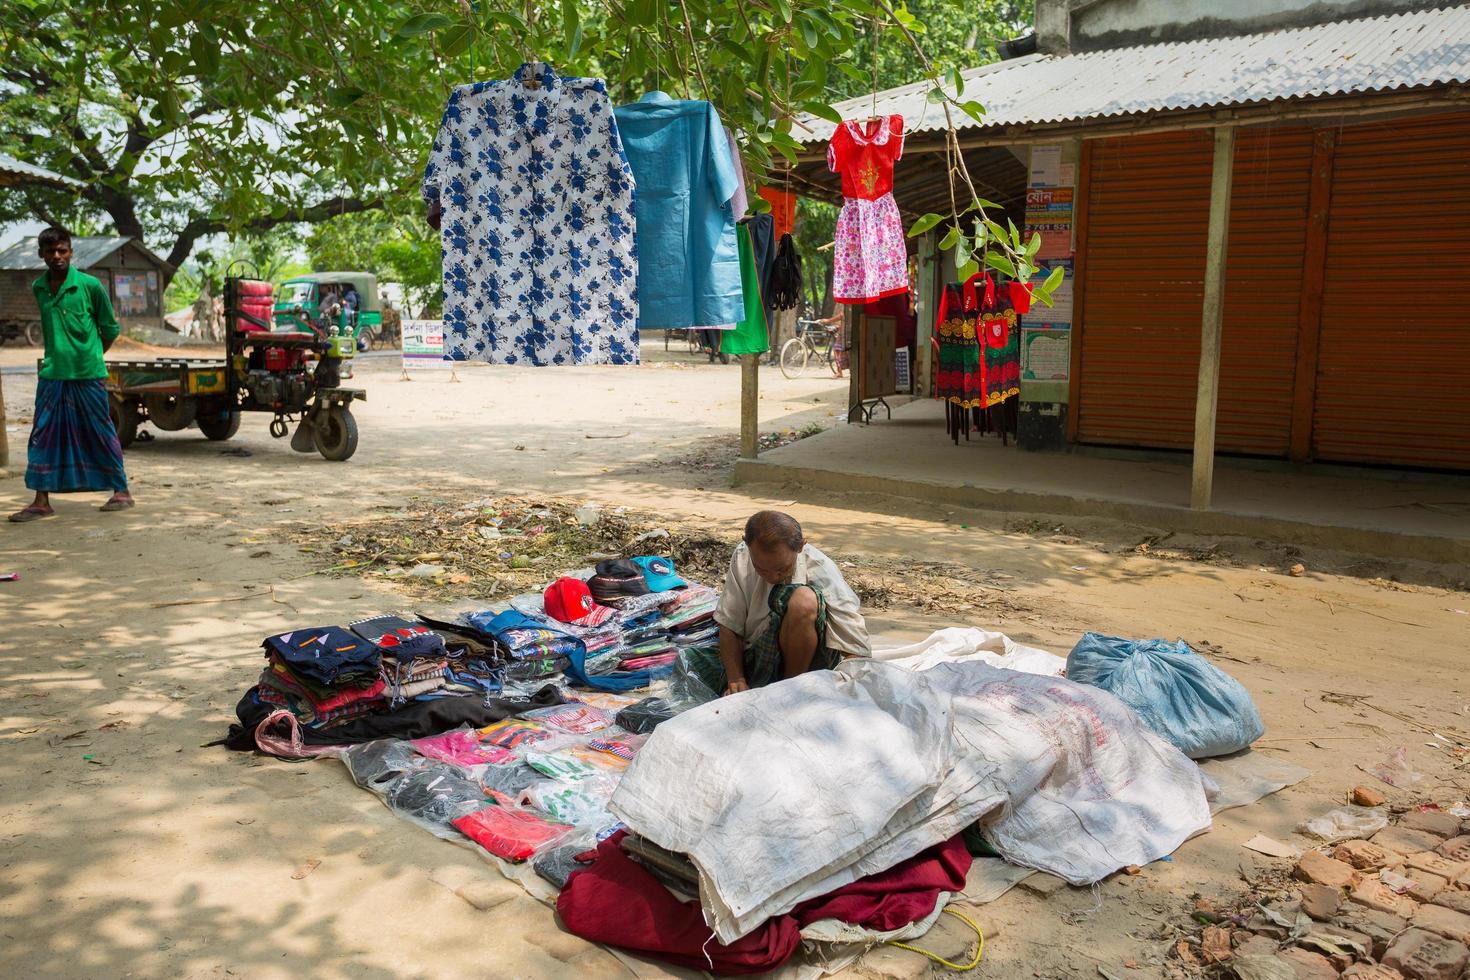 Bangladesh May 19, 2019 A Rural village Businessman selling cloth and products to hang up on the tree trunk, Meherpur, Bangladesh. photo